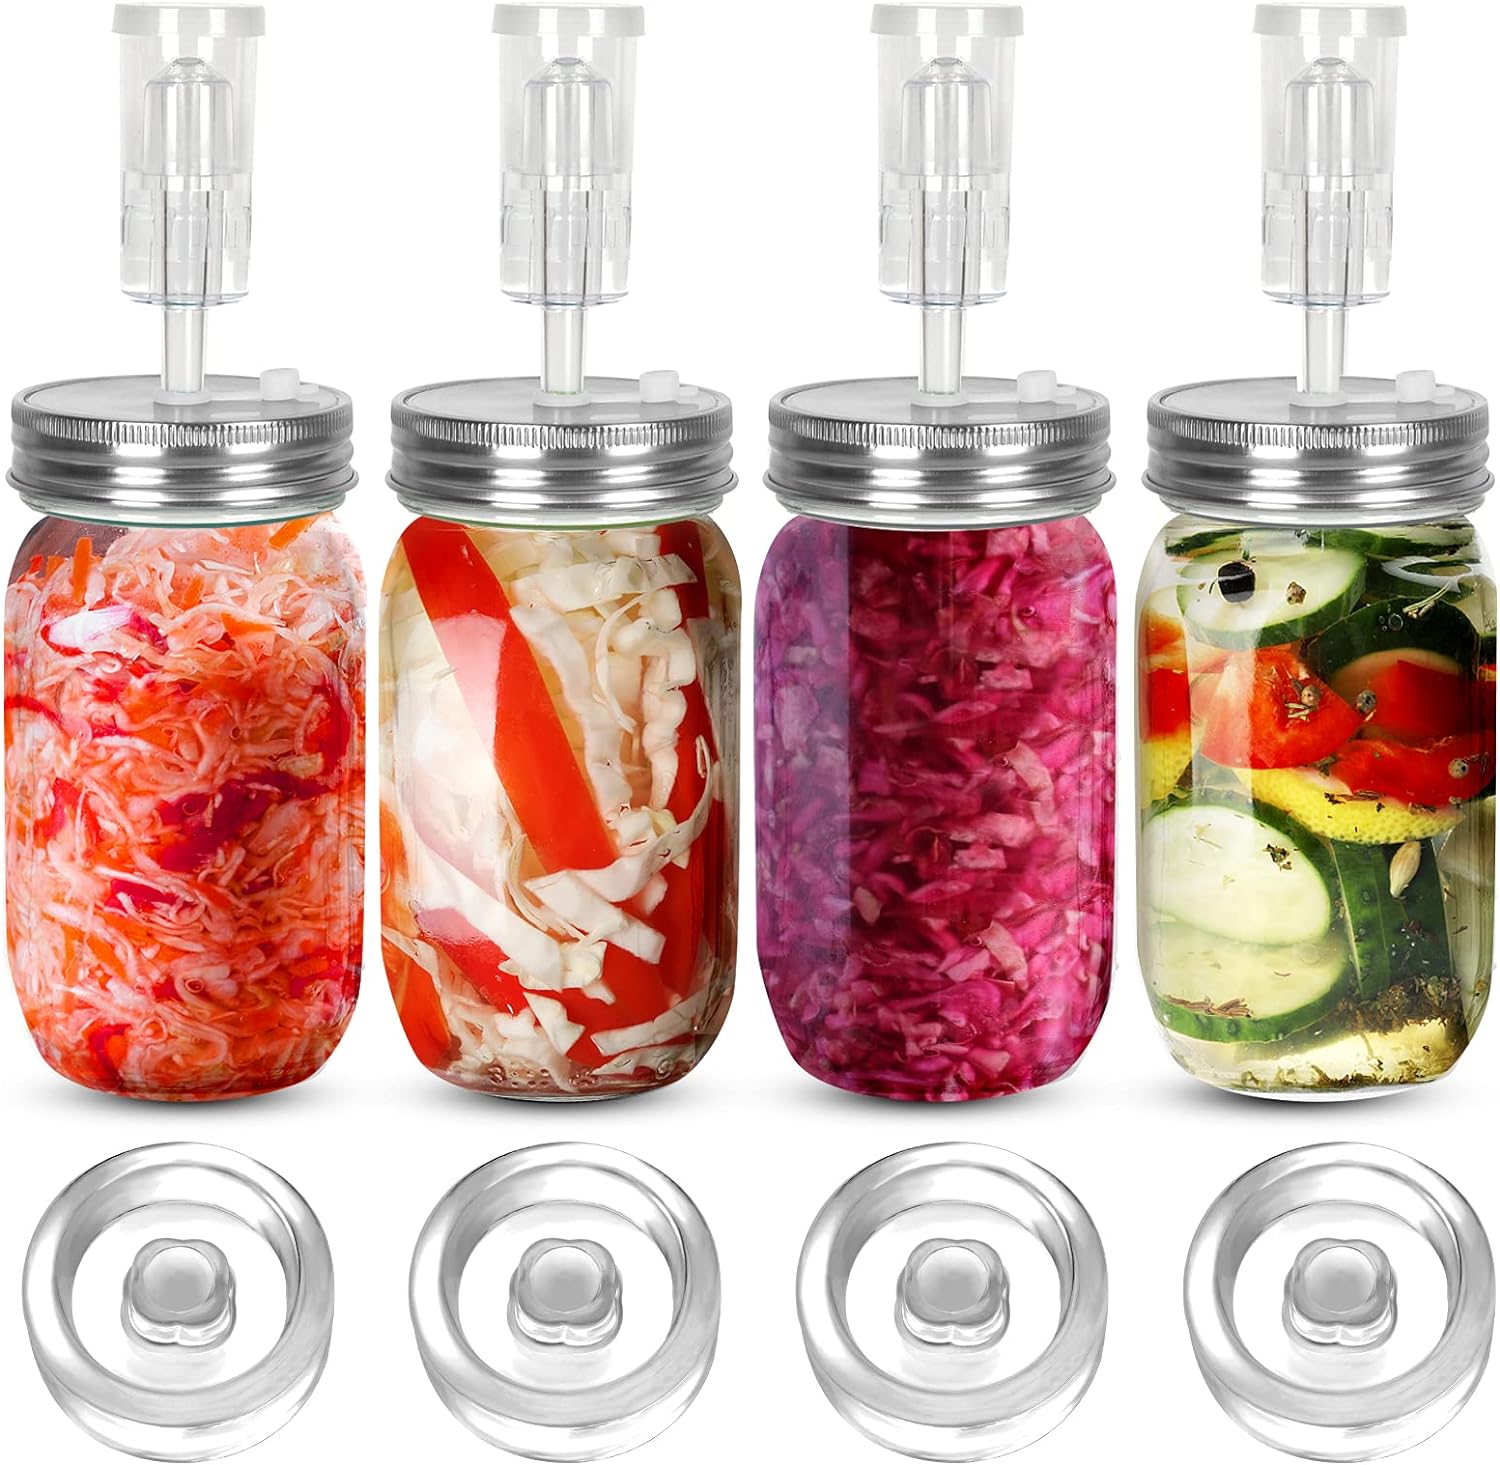 Samshow Fermentation Kit - Includes 4 NonSlip Grip Glass Fermentation Weights and 4 304 Stainless Steel Fermenting Lids with Airlocks for Wide Mouth Mason Jars Ferments Such As kimchi, Sauerkraut, etc